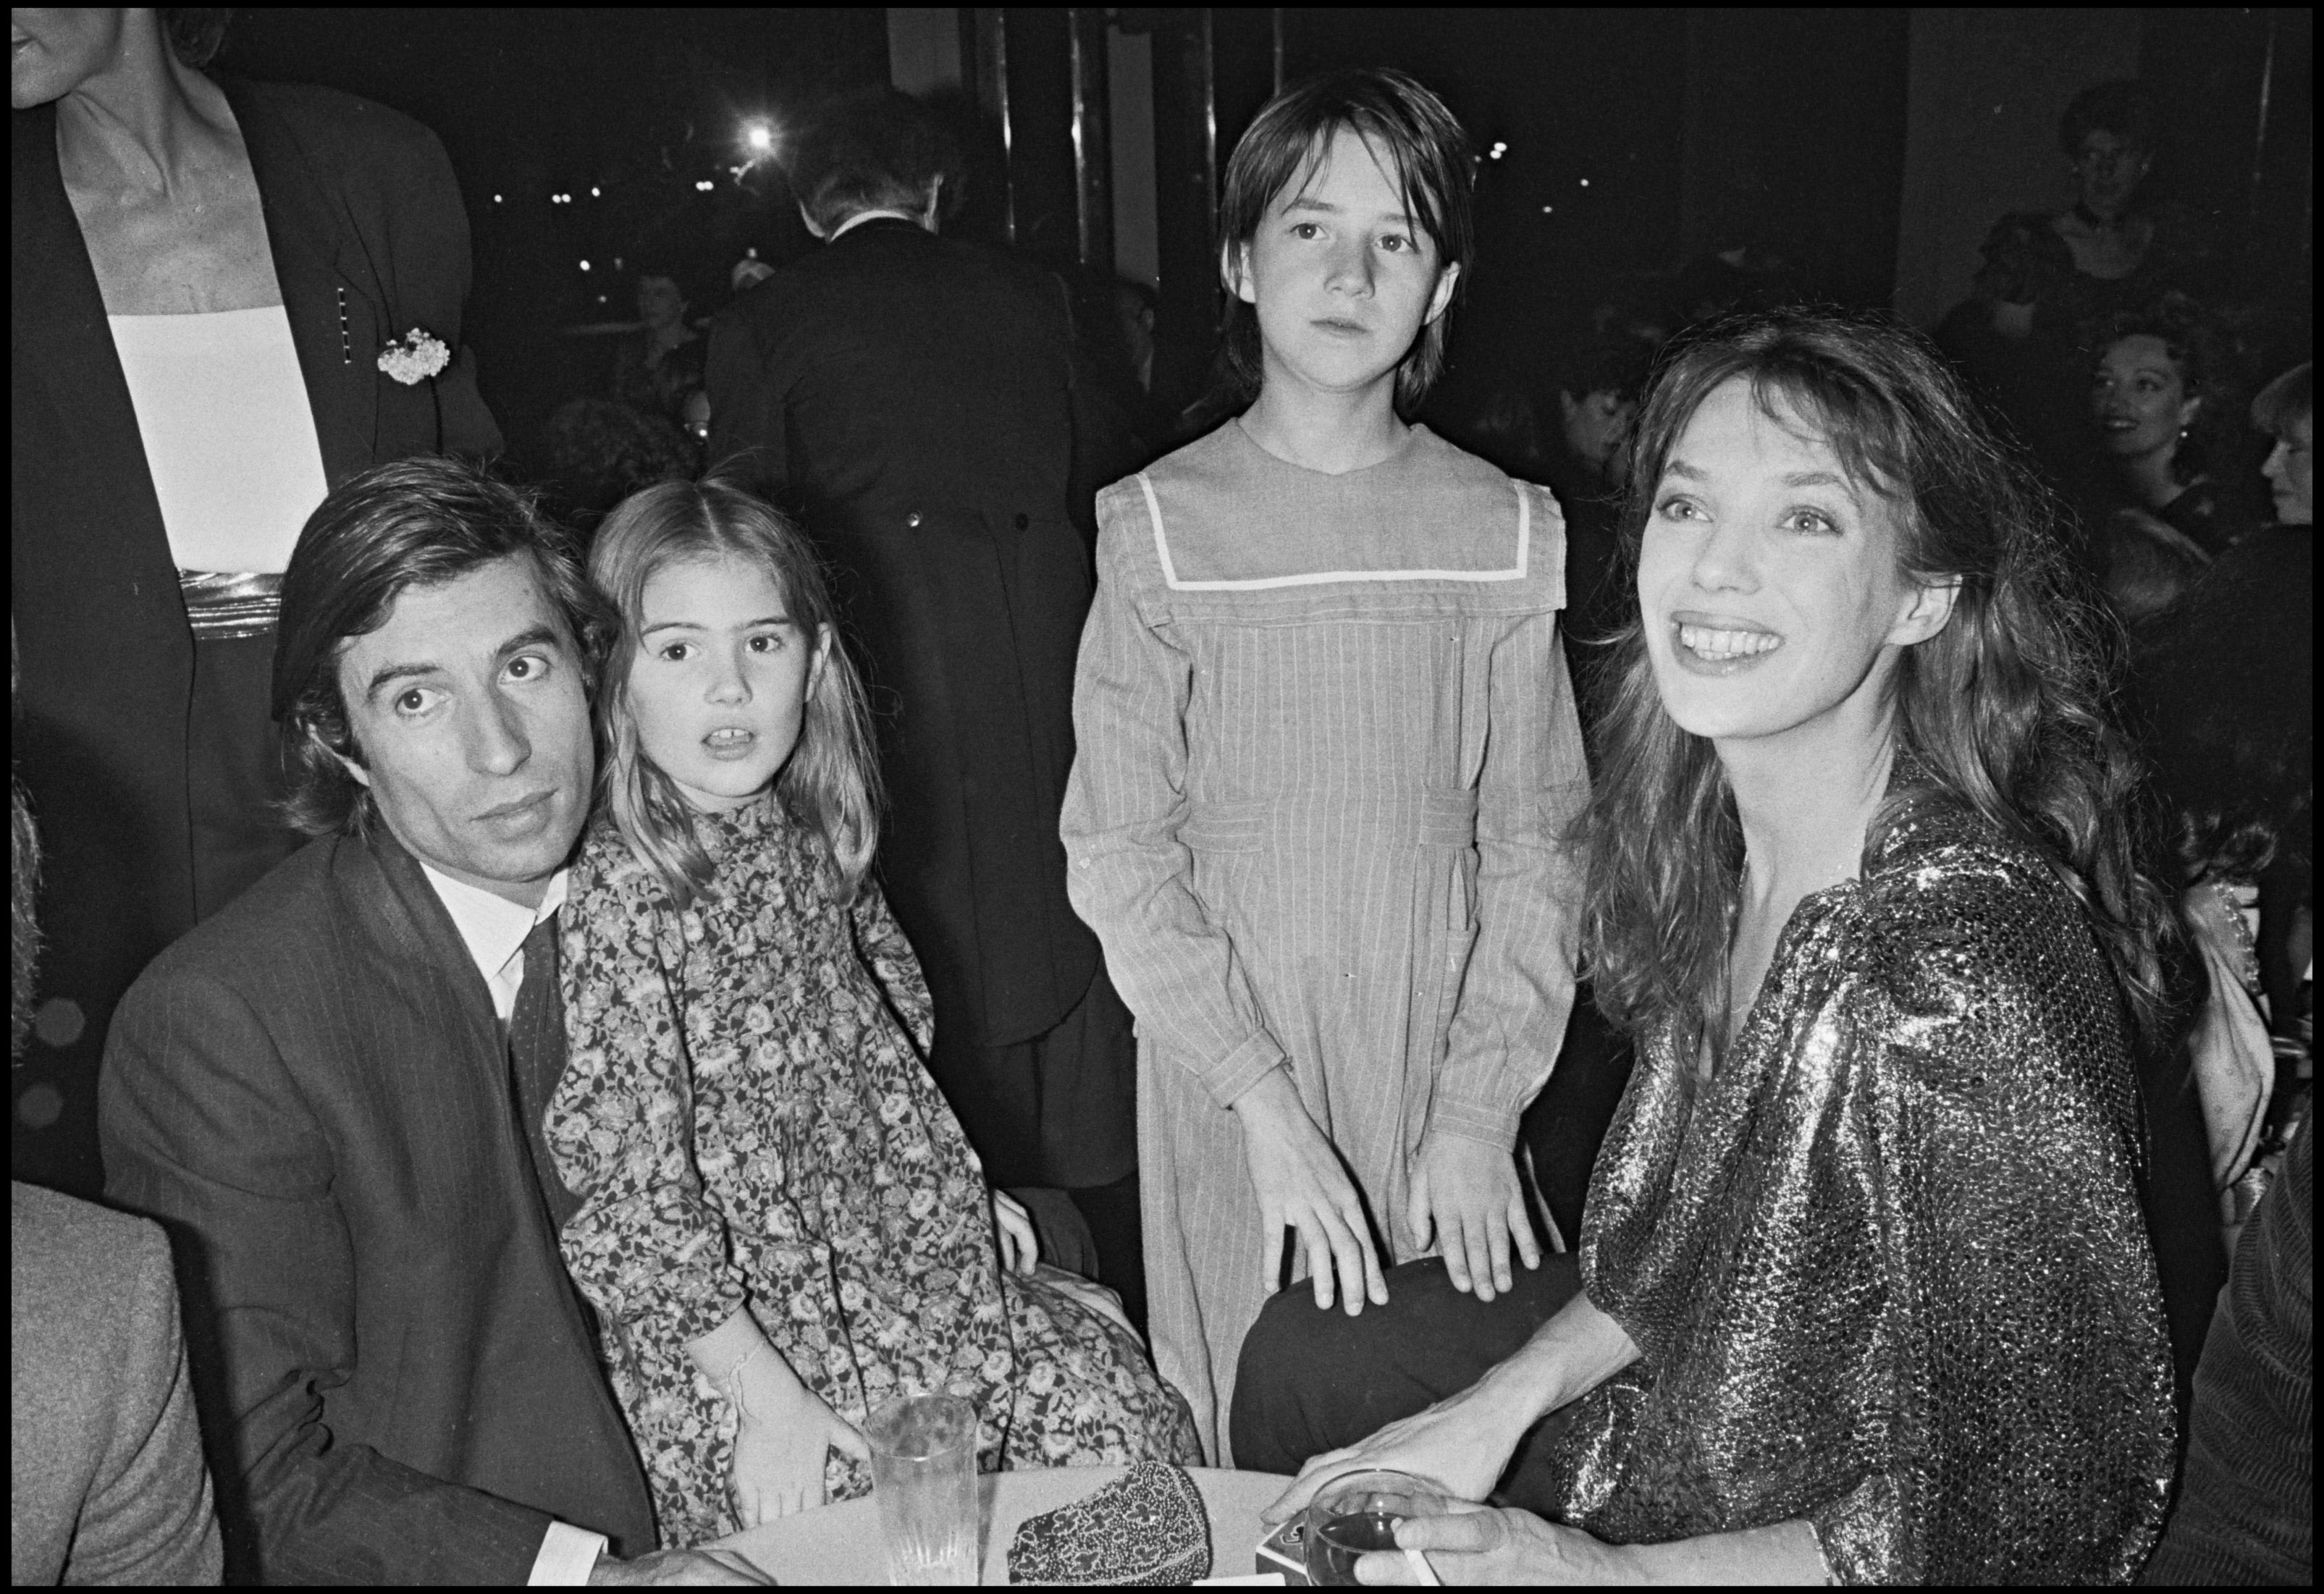 Charlotte Gainsbourg with her mother Jane Birkin, Jacques Doillon and his daughter Lola attend the party following the premiere of the film "Nestor Burma Detective De Choc." | Source: Getty Images